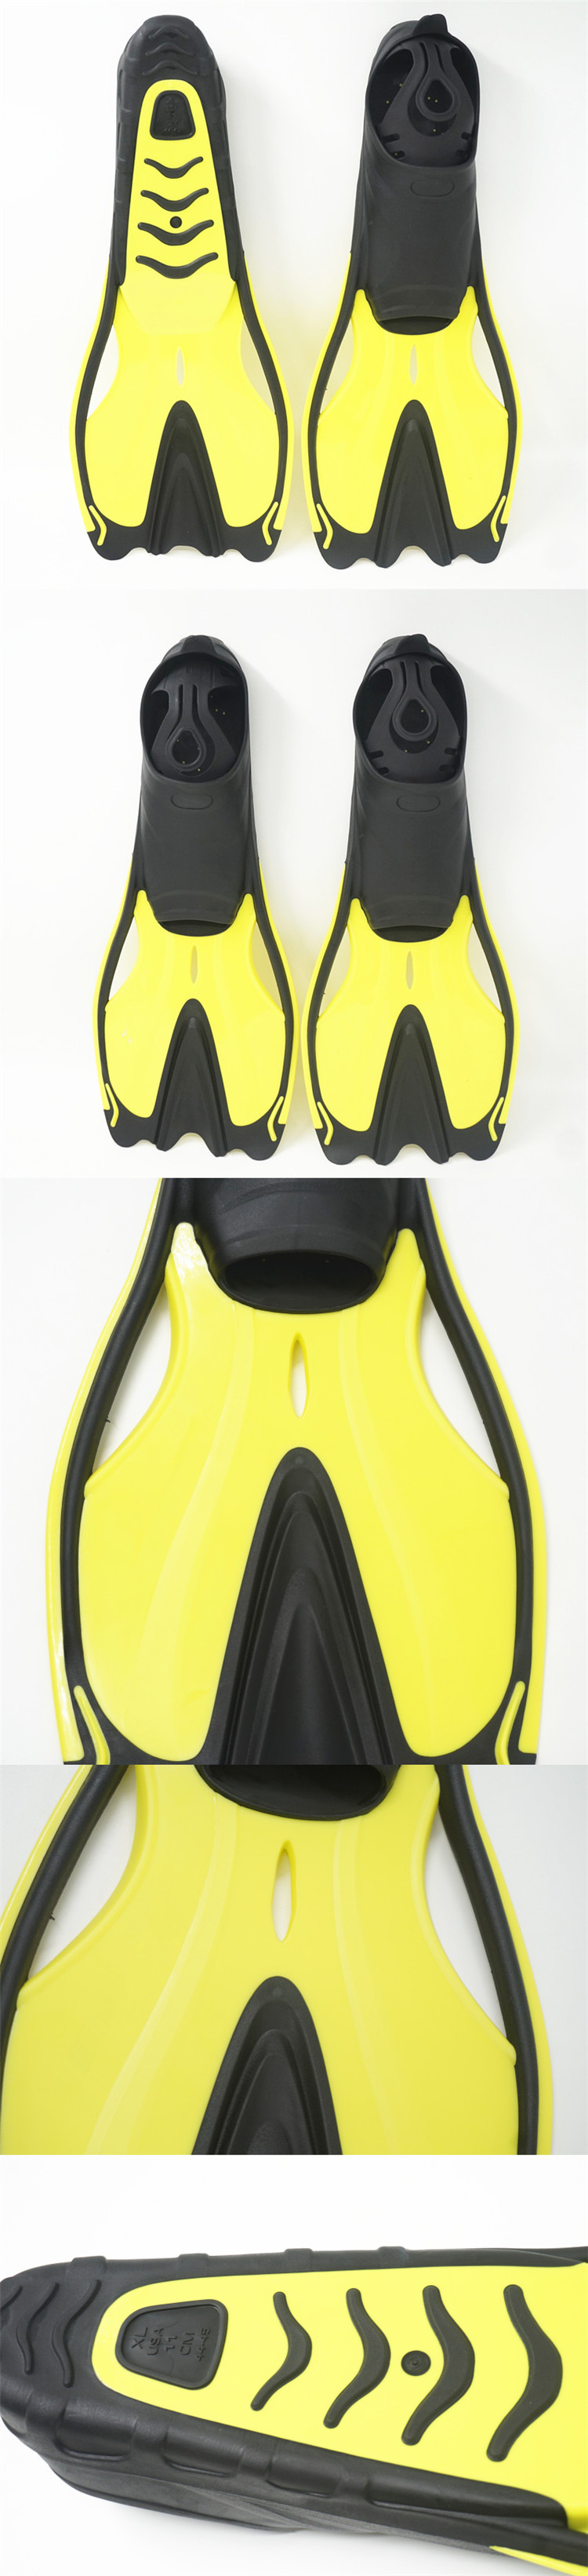 Diving-Fins-Swim-Footsteps-Silicone-Snorkeling-Diving-Swimming-Sports-Equipment-Long-Fins-1138058-6